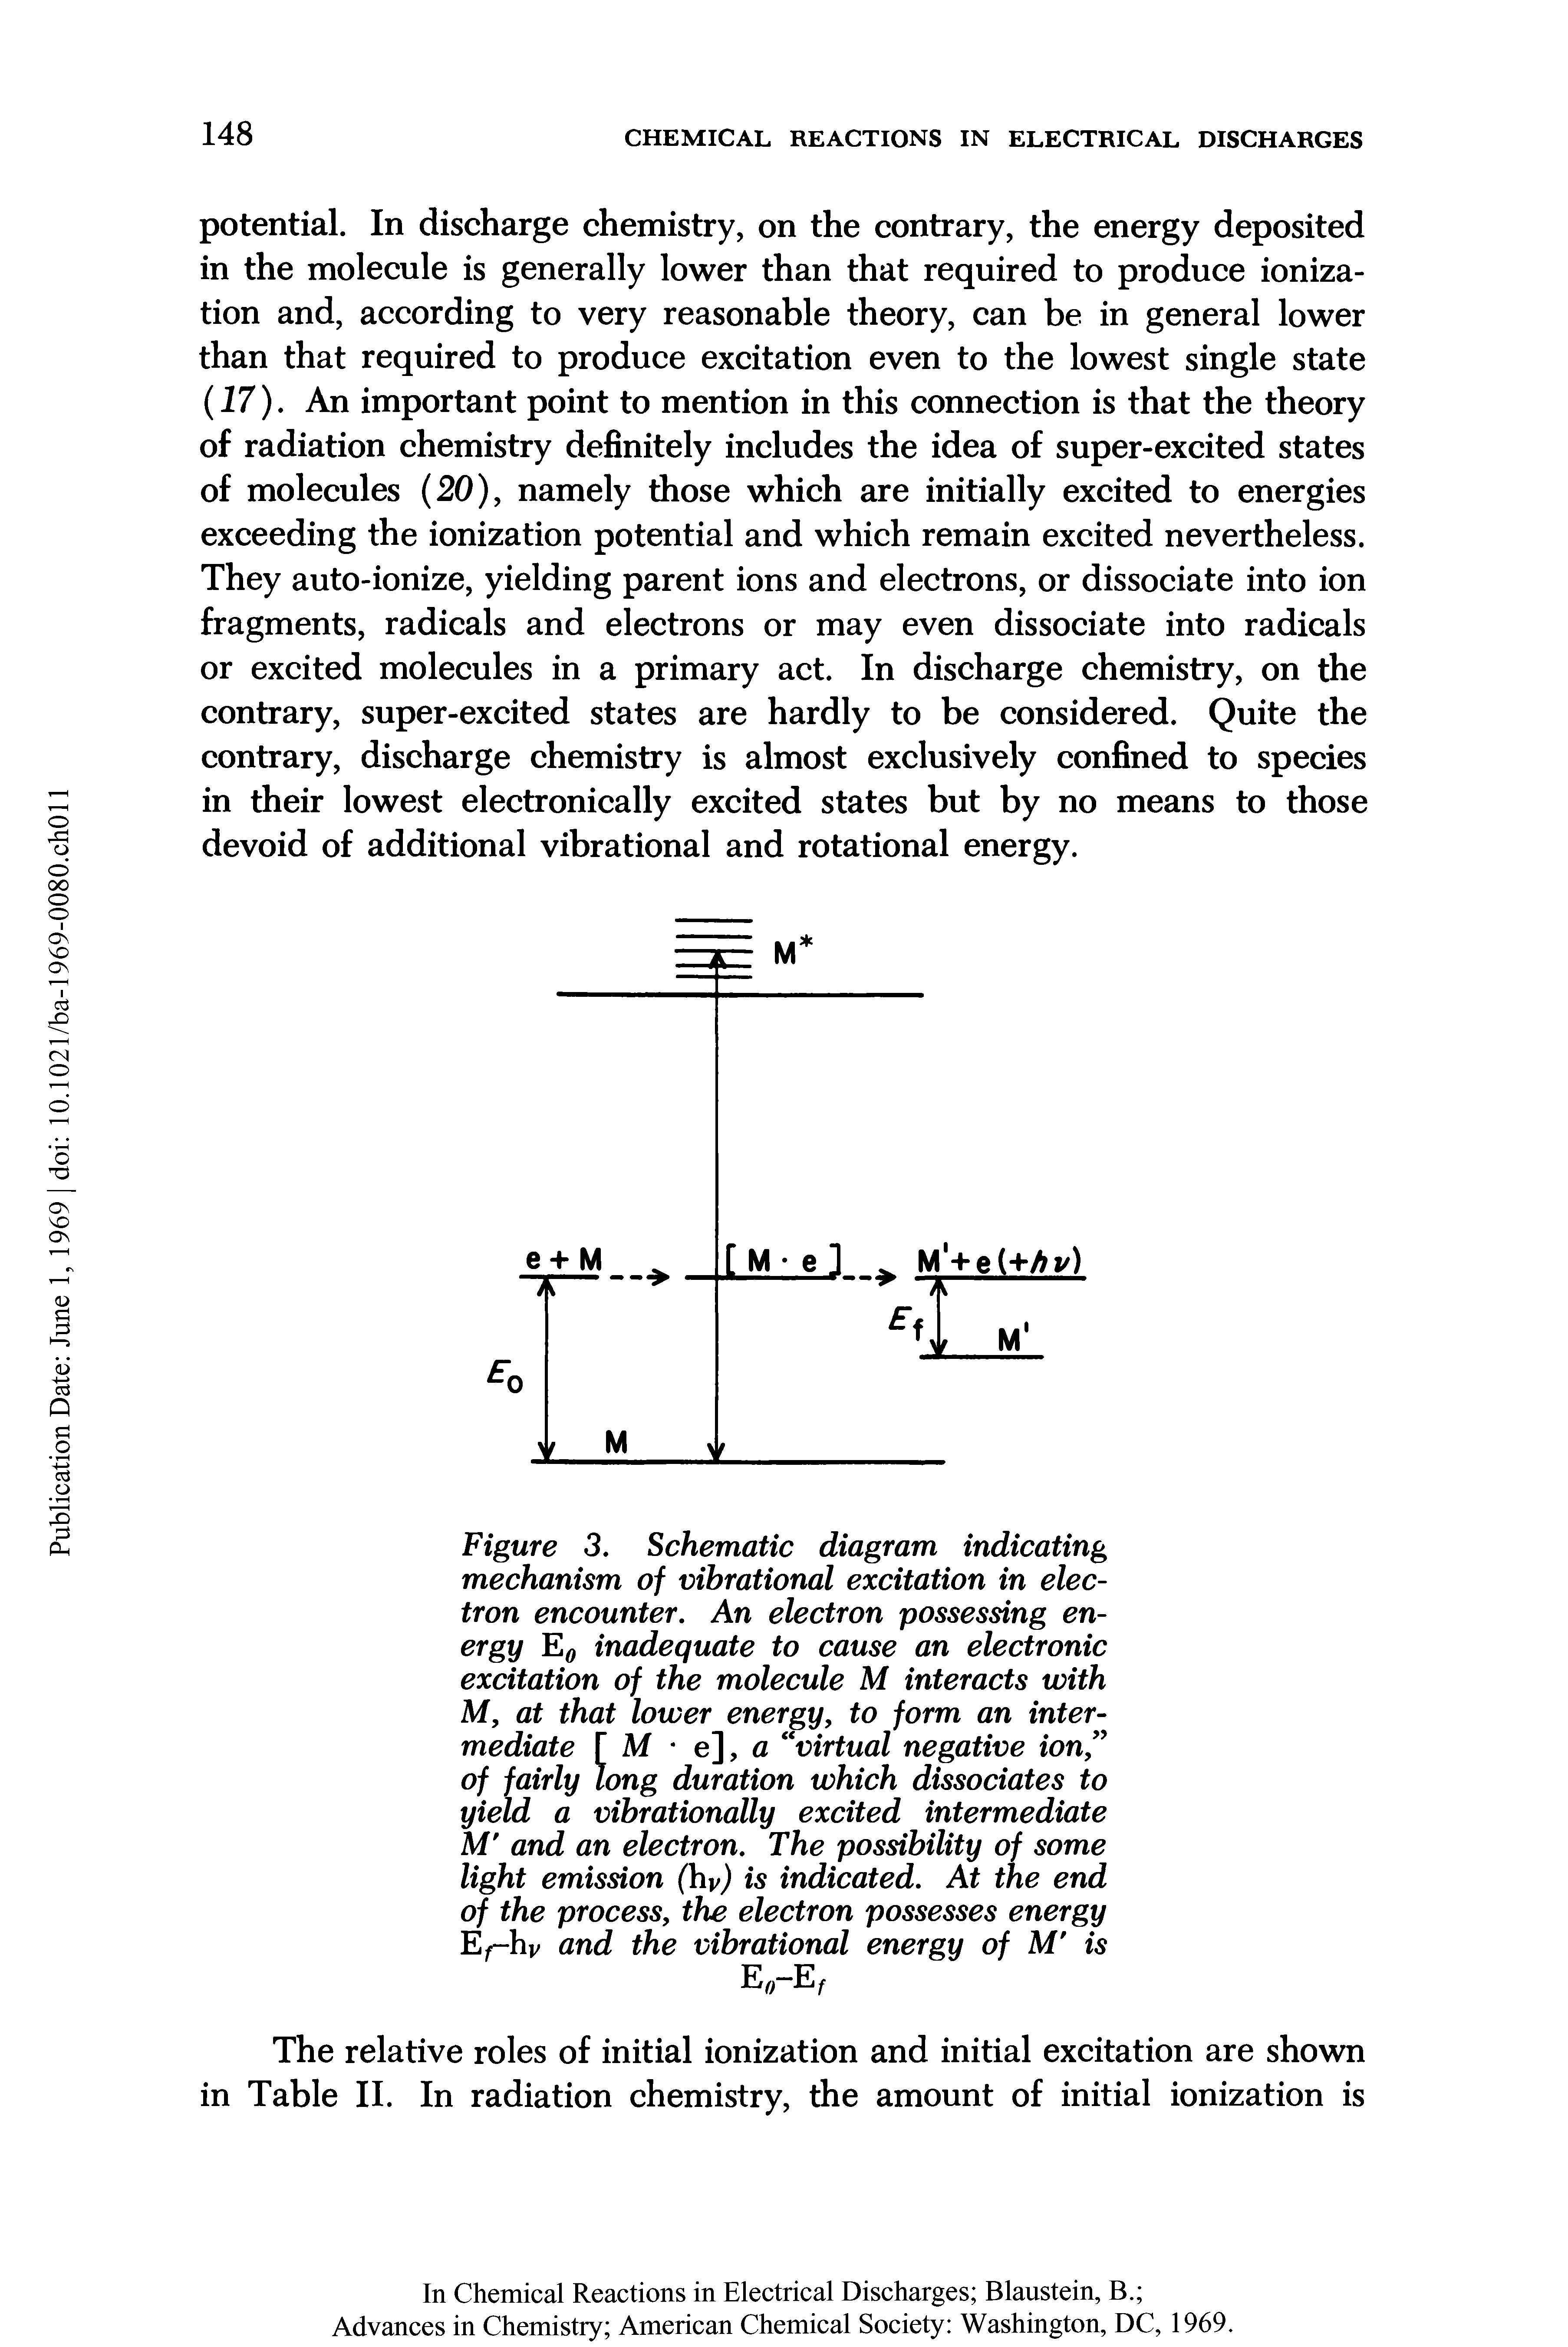 Figure 3. Schematic diagram indicating mechanism of vibrational excitation in electron encounter. An electron possessing energy E0 inadequate to cause an electronic excitation of the molecule M interacts with M, at that lower energy, to form an intermediate [ M e], a virtual negative ion, of fairly tong duration which dissociates to yield a vibrationally excited intermediate M and an electron. The possibility of some light emission (hv) is indicated. At the end of the process, the electron possesses energy Ef-hv and the vibrational energy of M is...